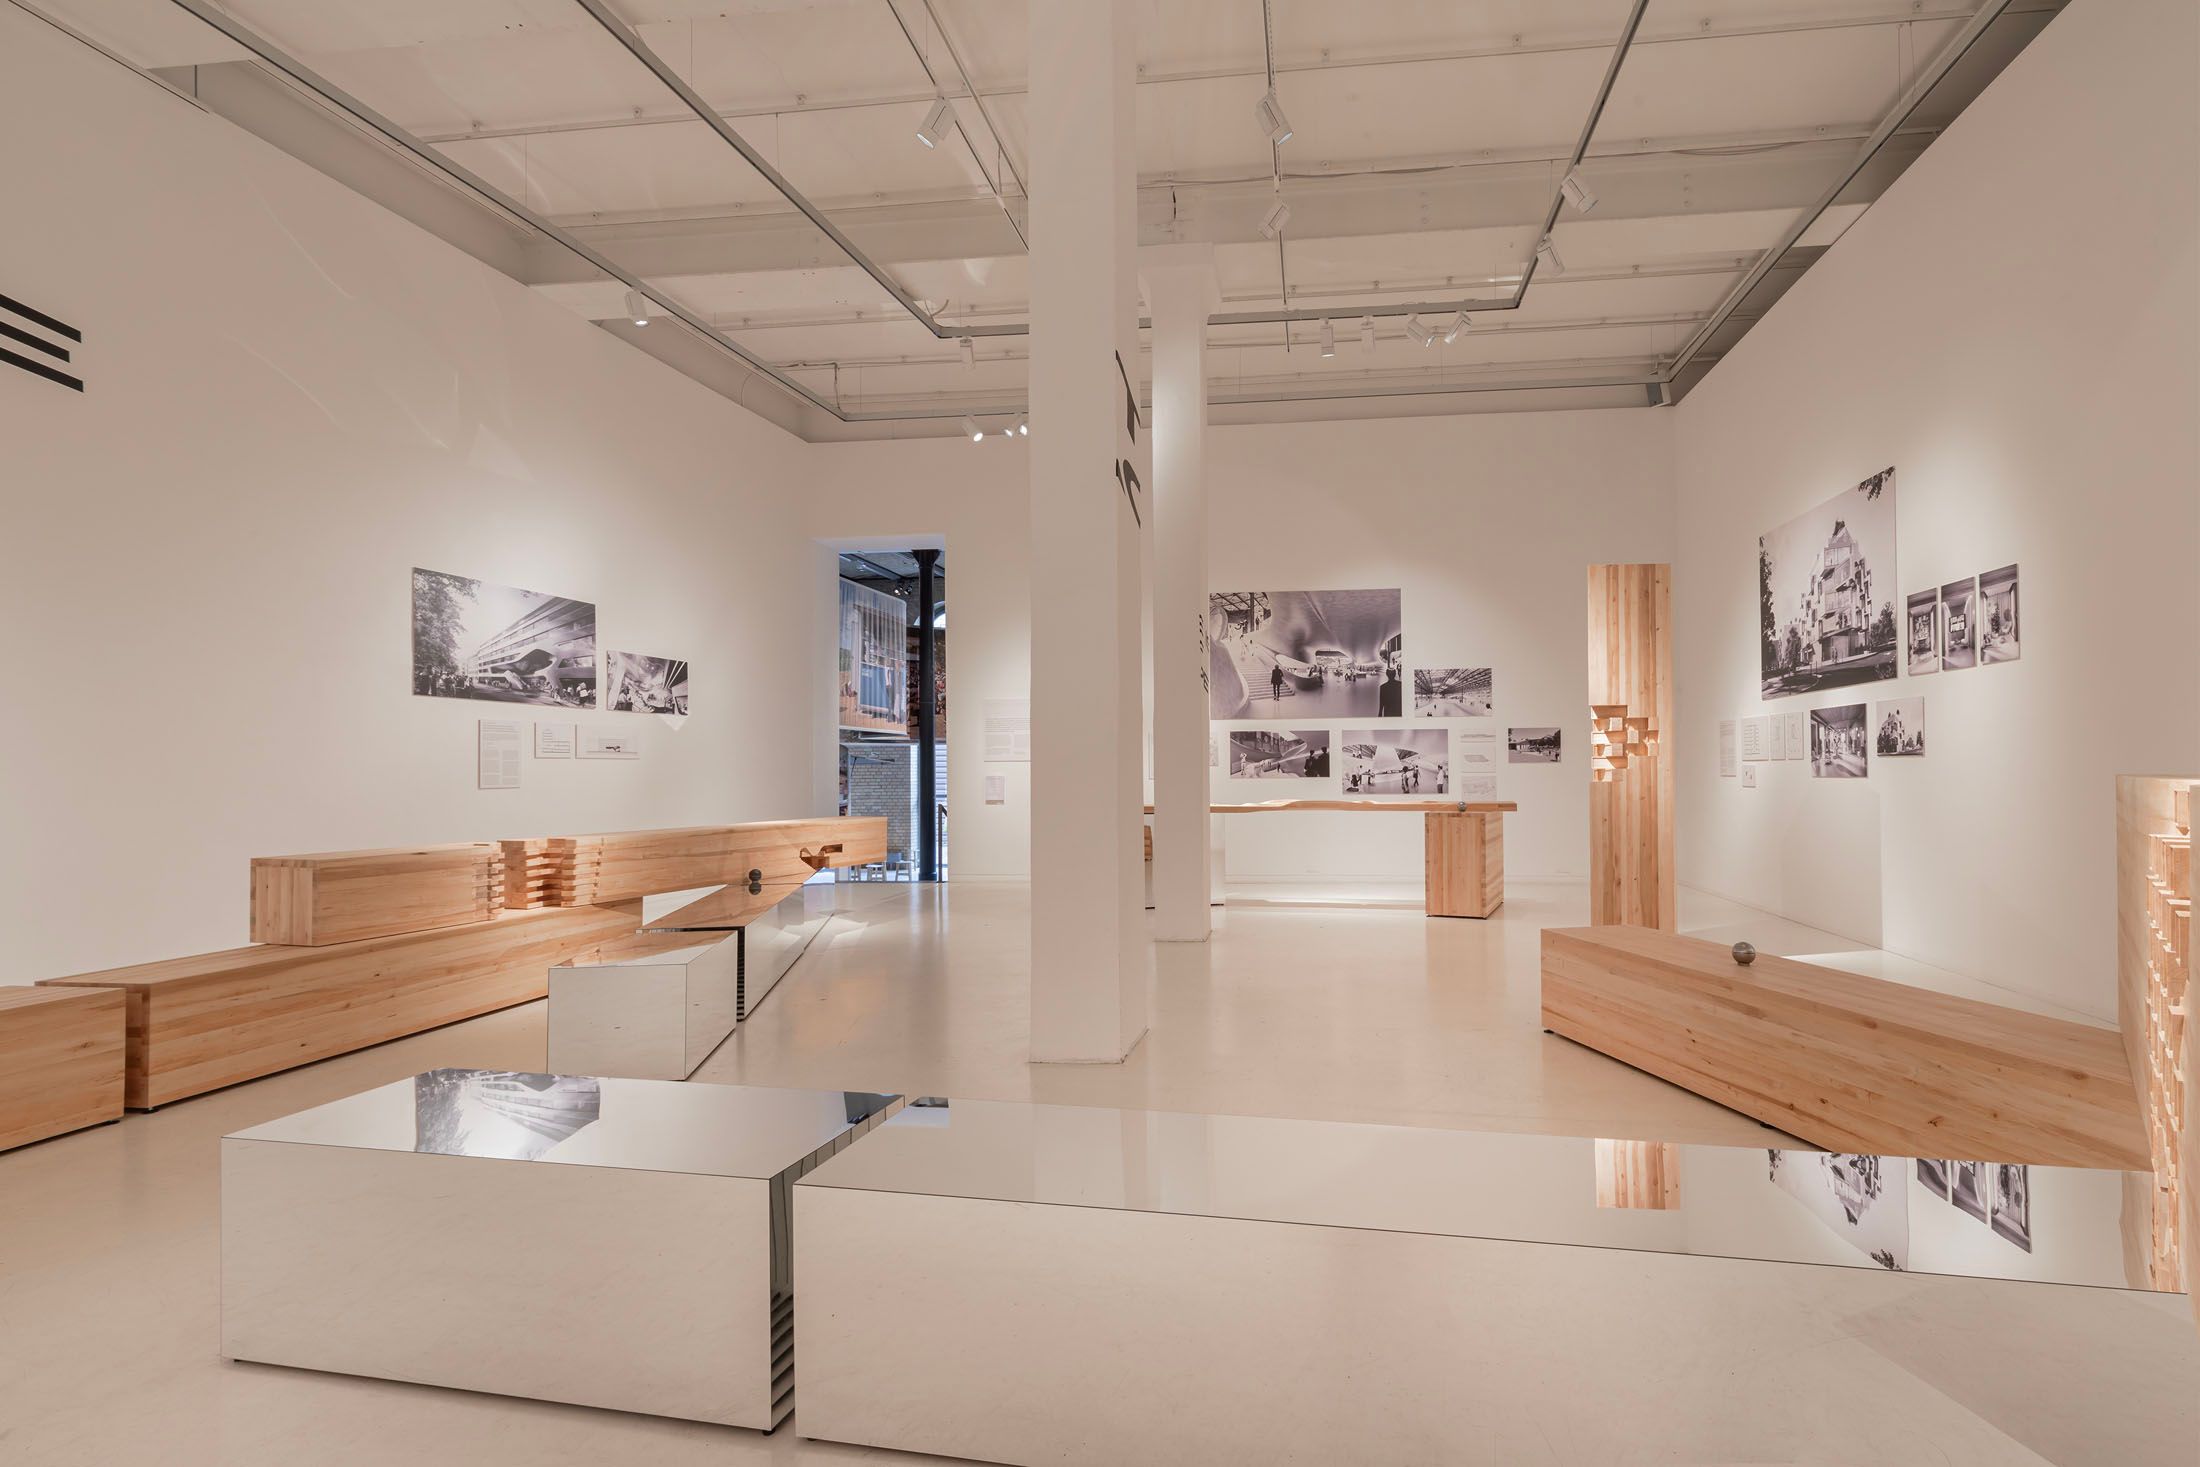 View of the exhibiton space